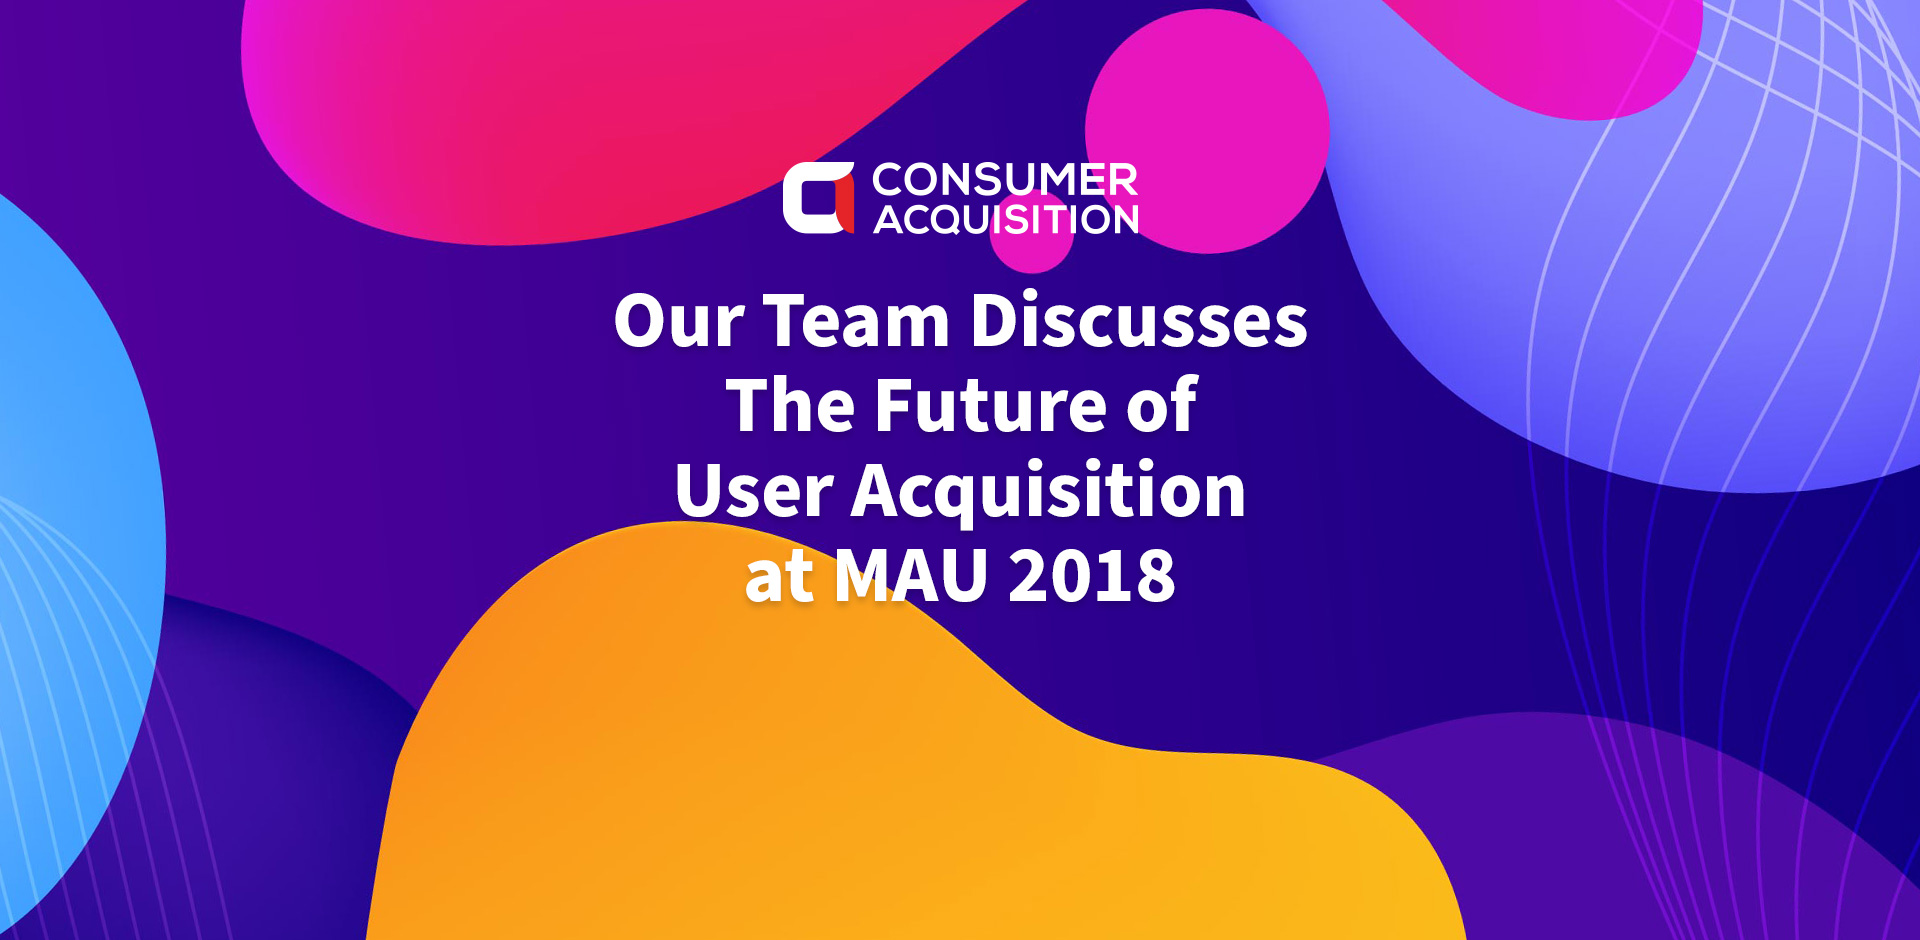 Our Team Discusses The Future of User Acquisition at MAU 2018